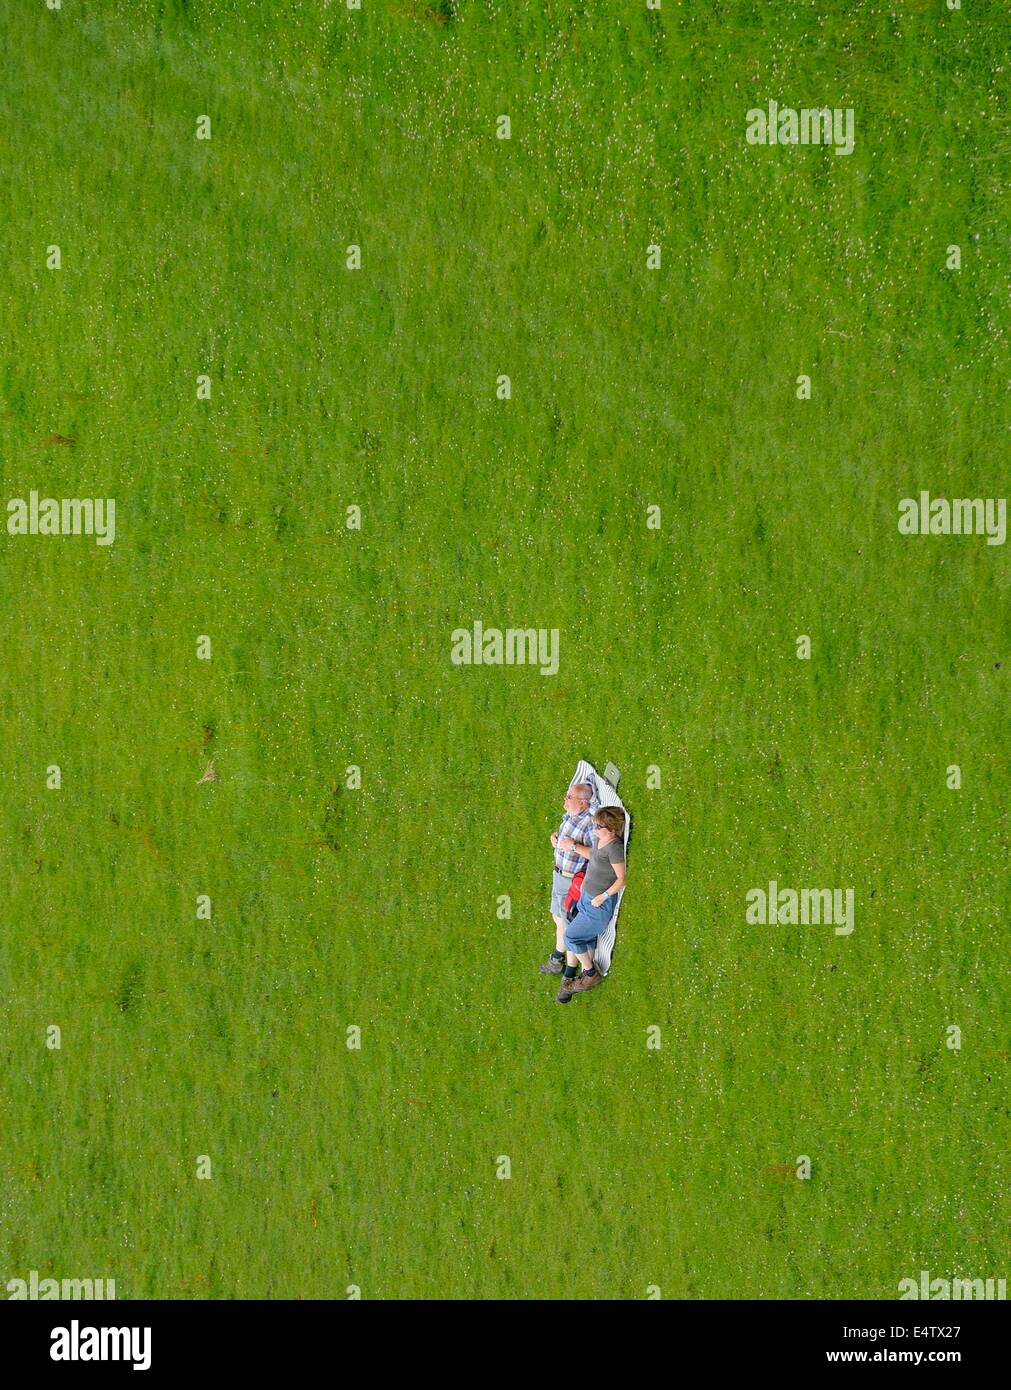 A couple laying down sunbathing in a field. Image rotated to look like a wall of grass. Derbyshire england uk Stock Photo